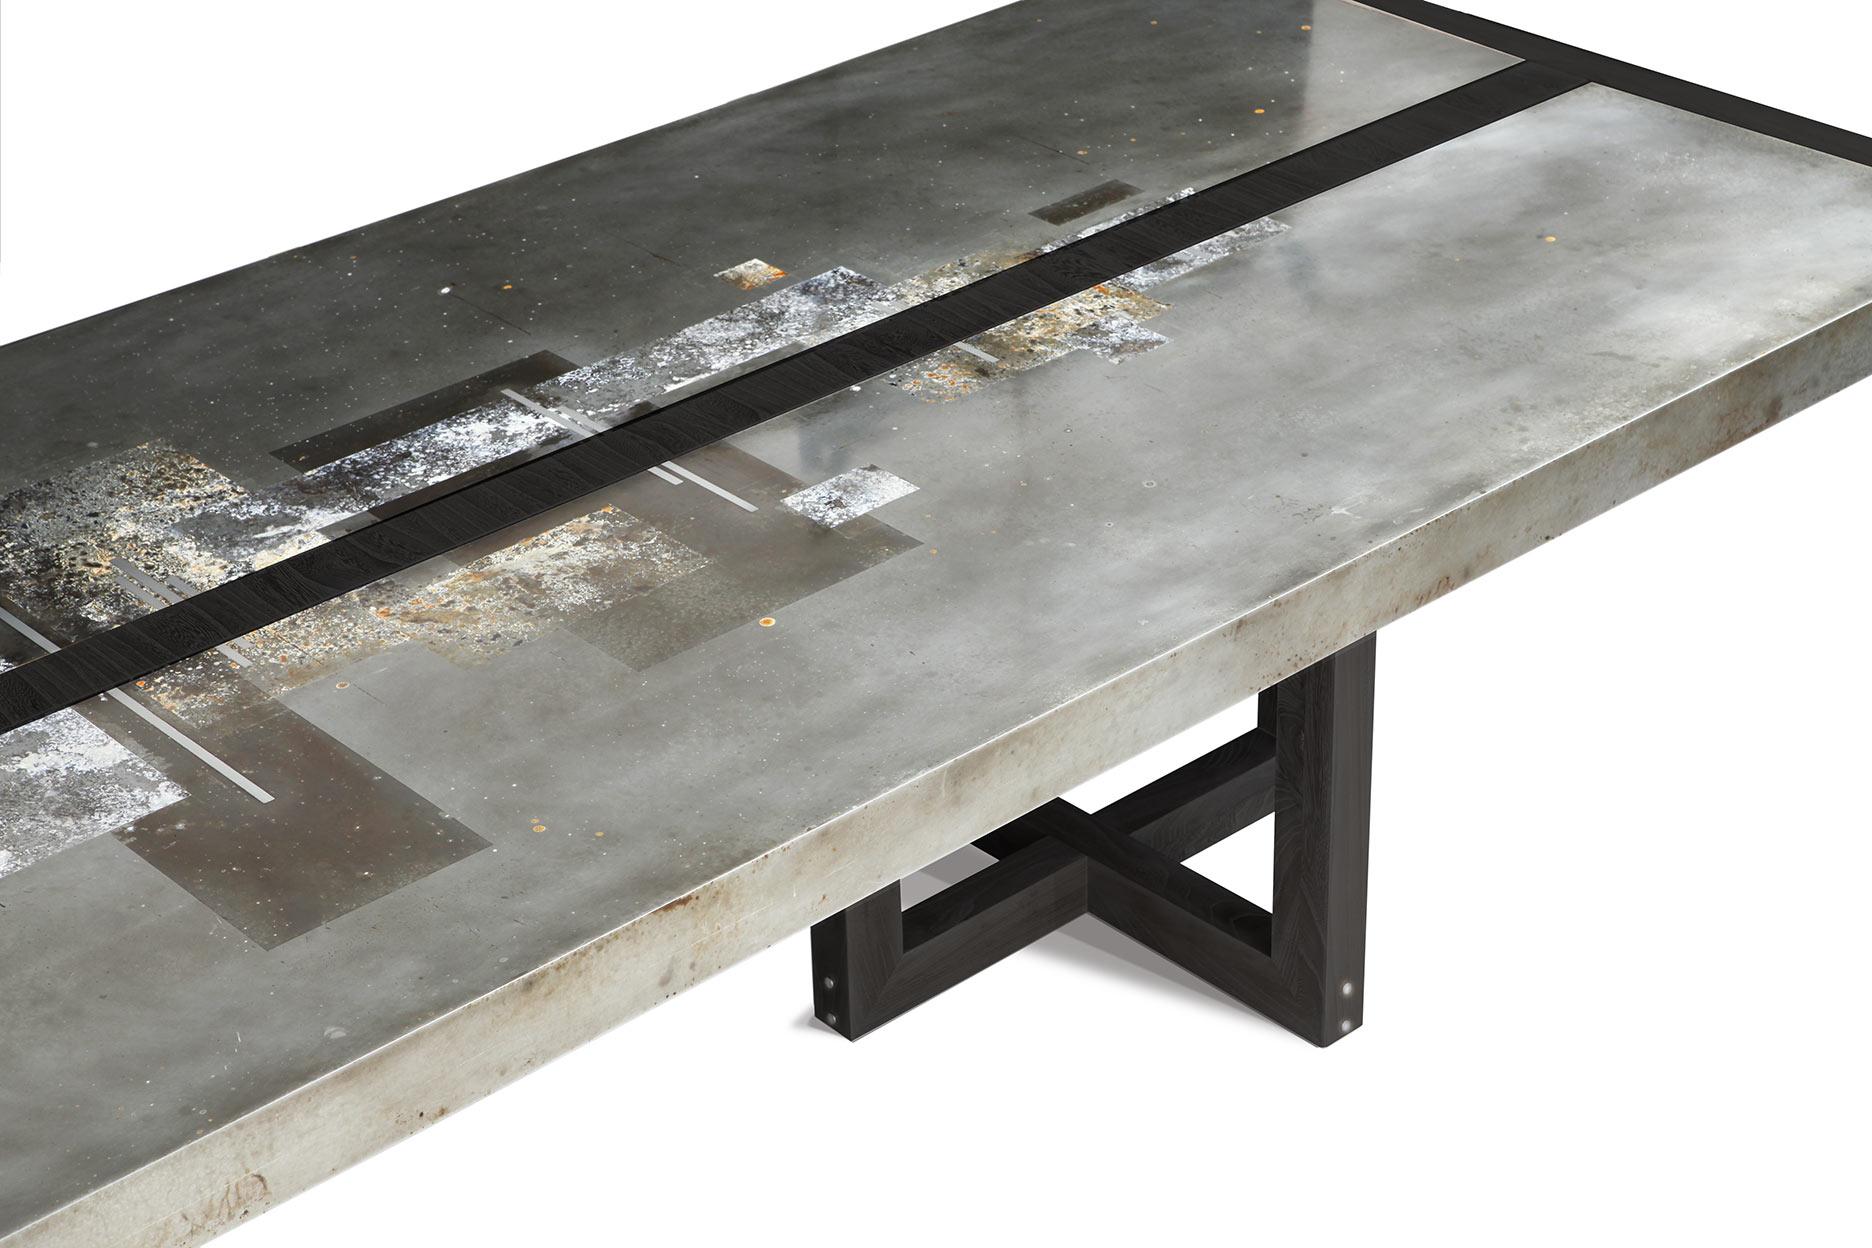 A work of art for your dining room! This Studio Roeper original features an acid-etched zinc top in our signature patina style. The industrial character of the metal is complemented by the neutral black palette of the ebonized walnut wood finish.